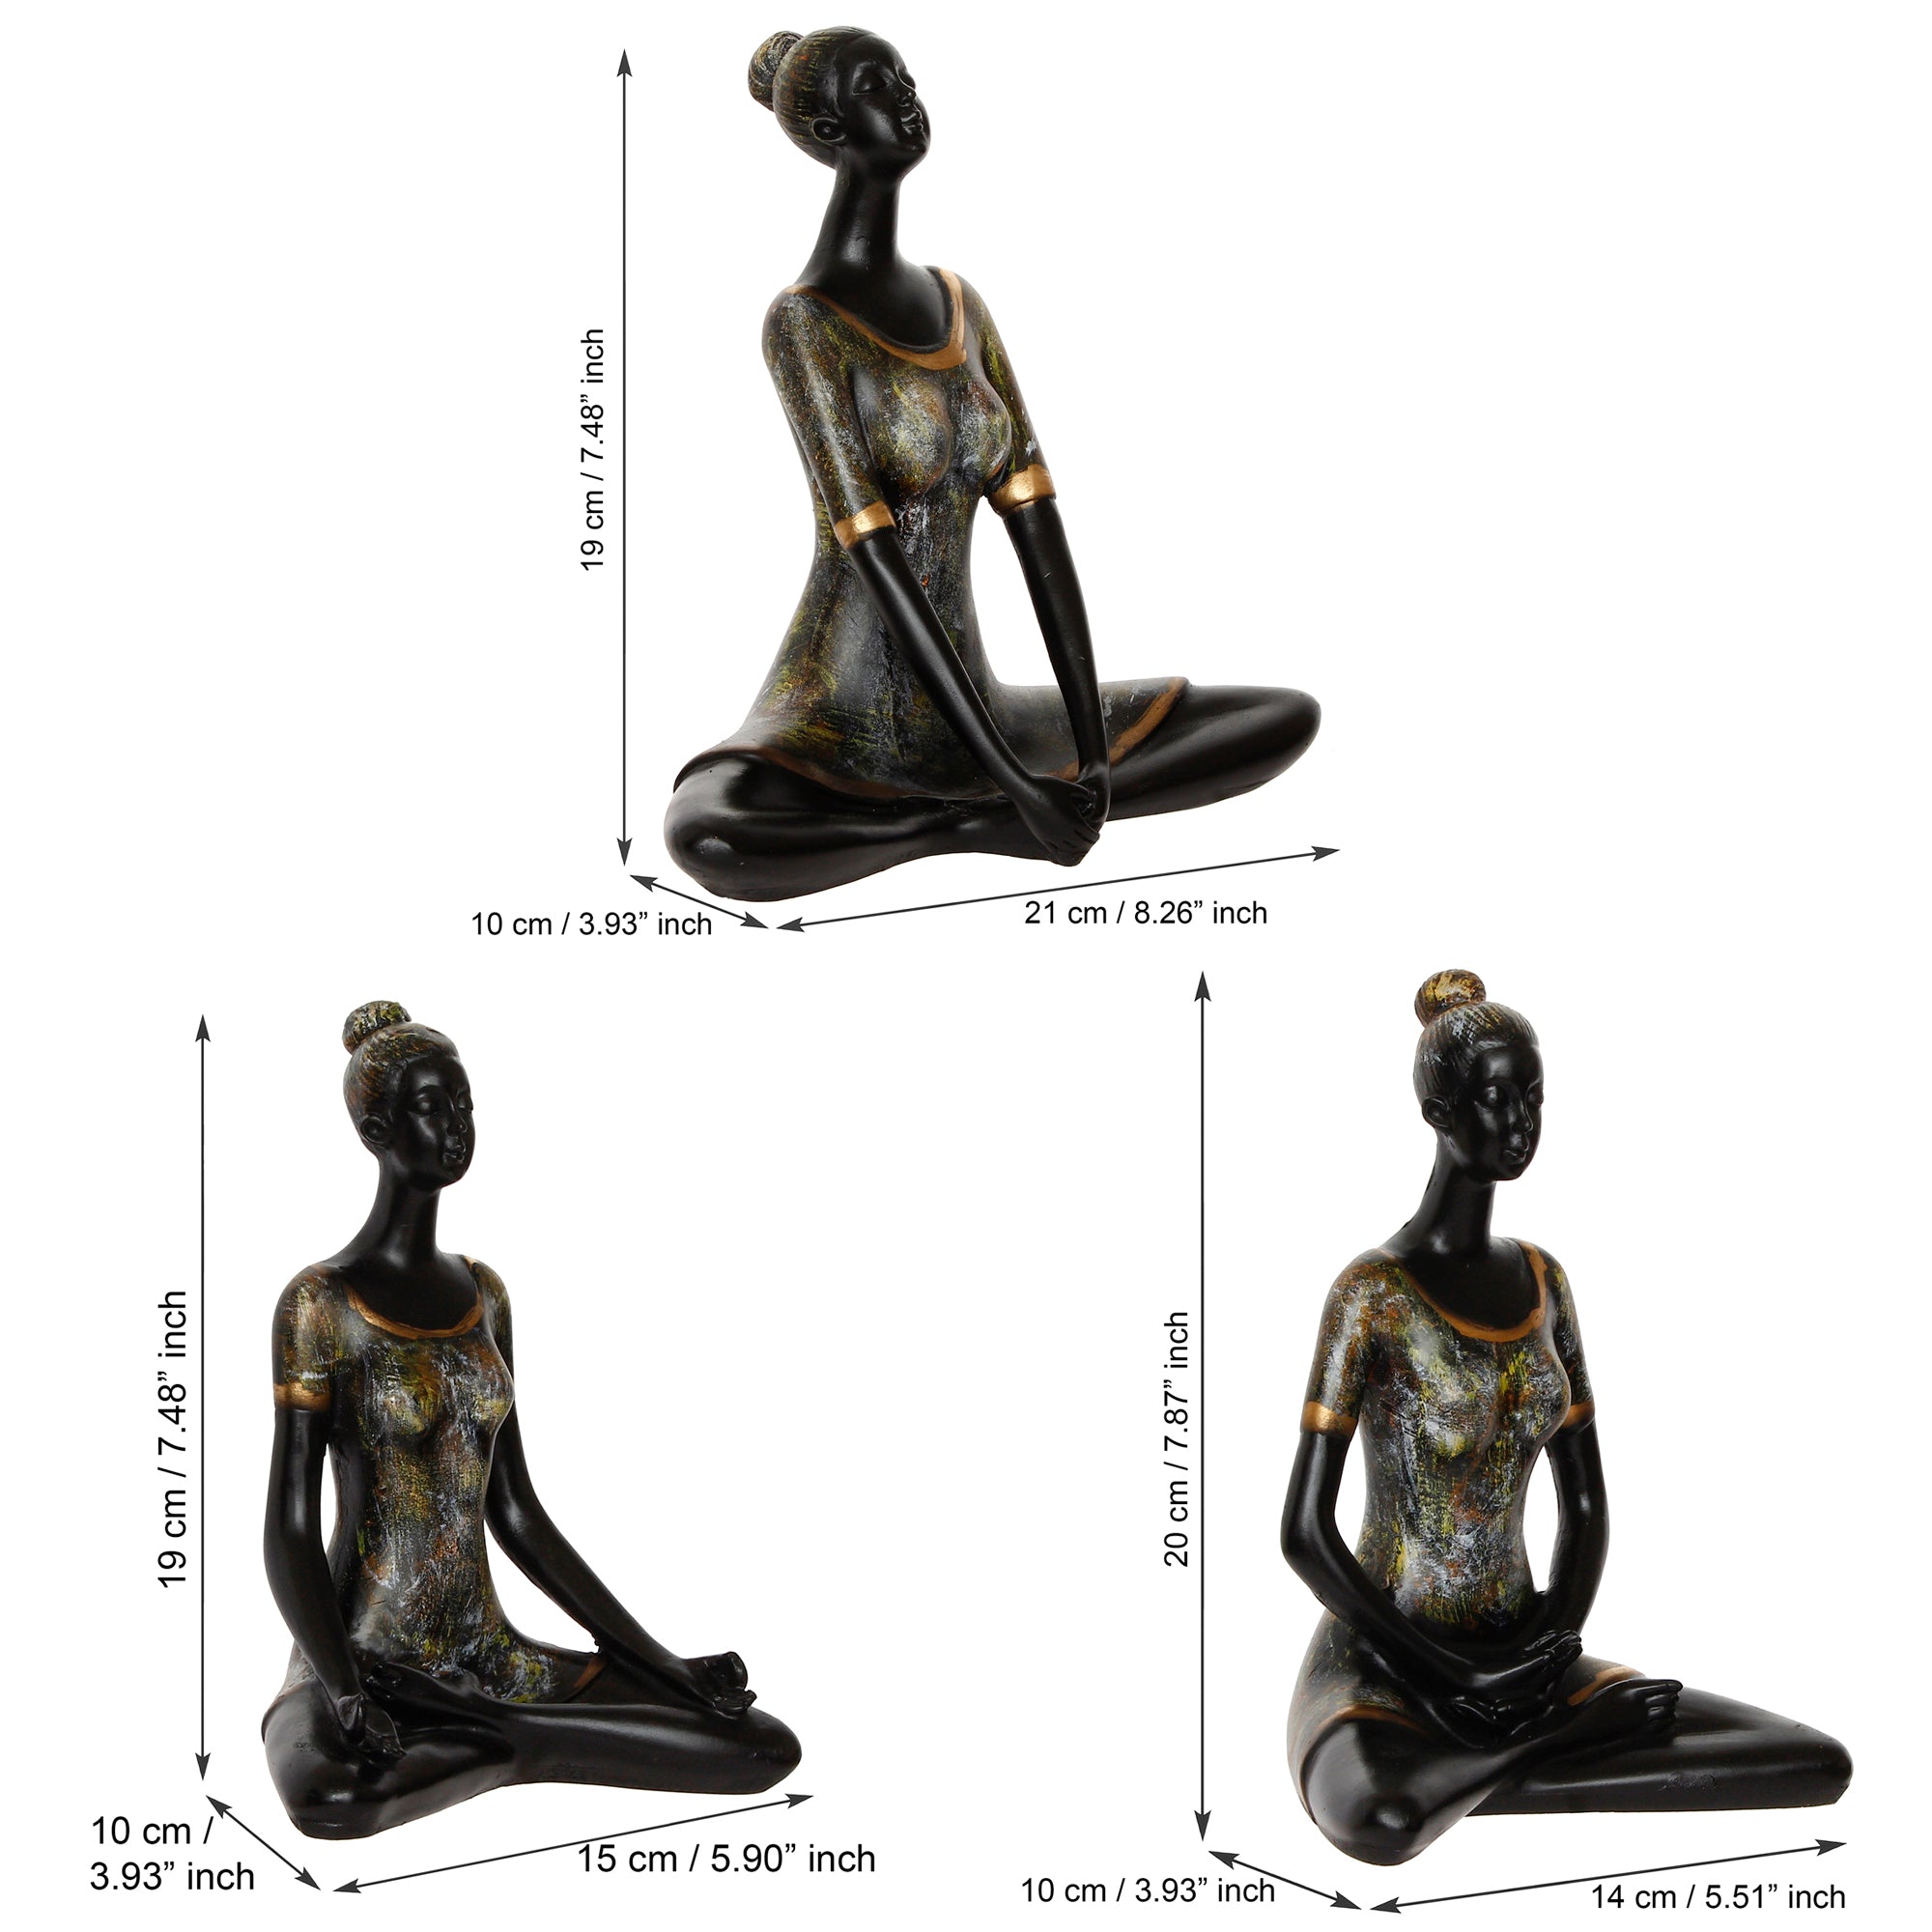 Set of 3 Ladies in Sukhasana, Padmasana, Butterfly Yoga Poses Handcrafted Decorative Polyresin Showpieces 3